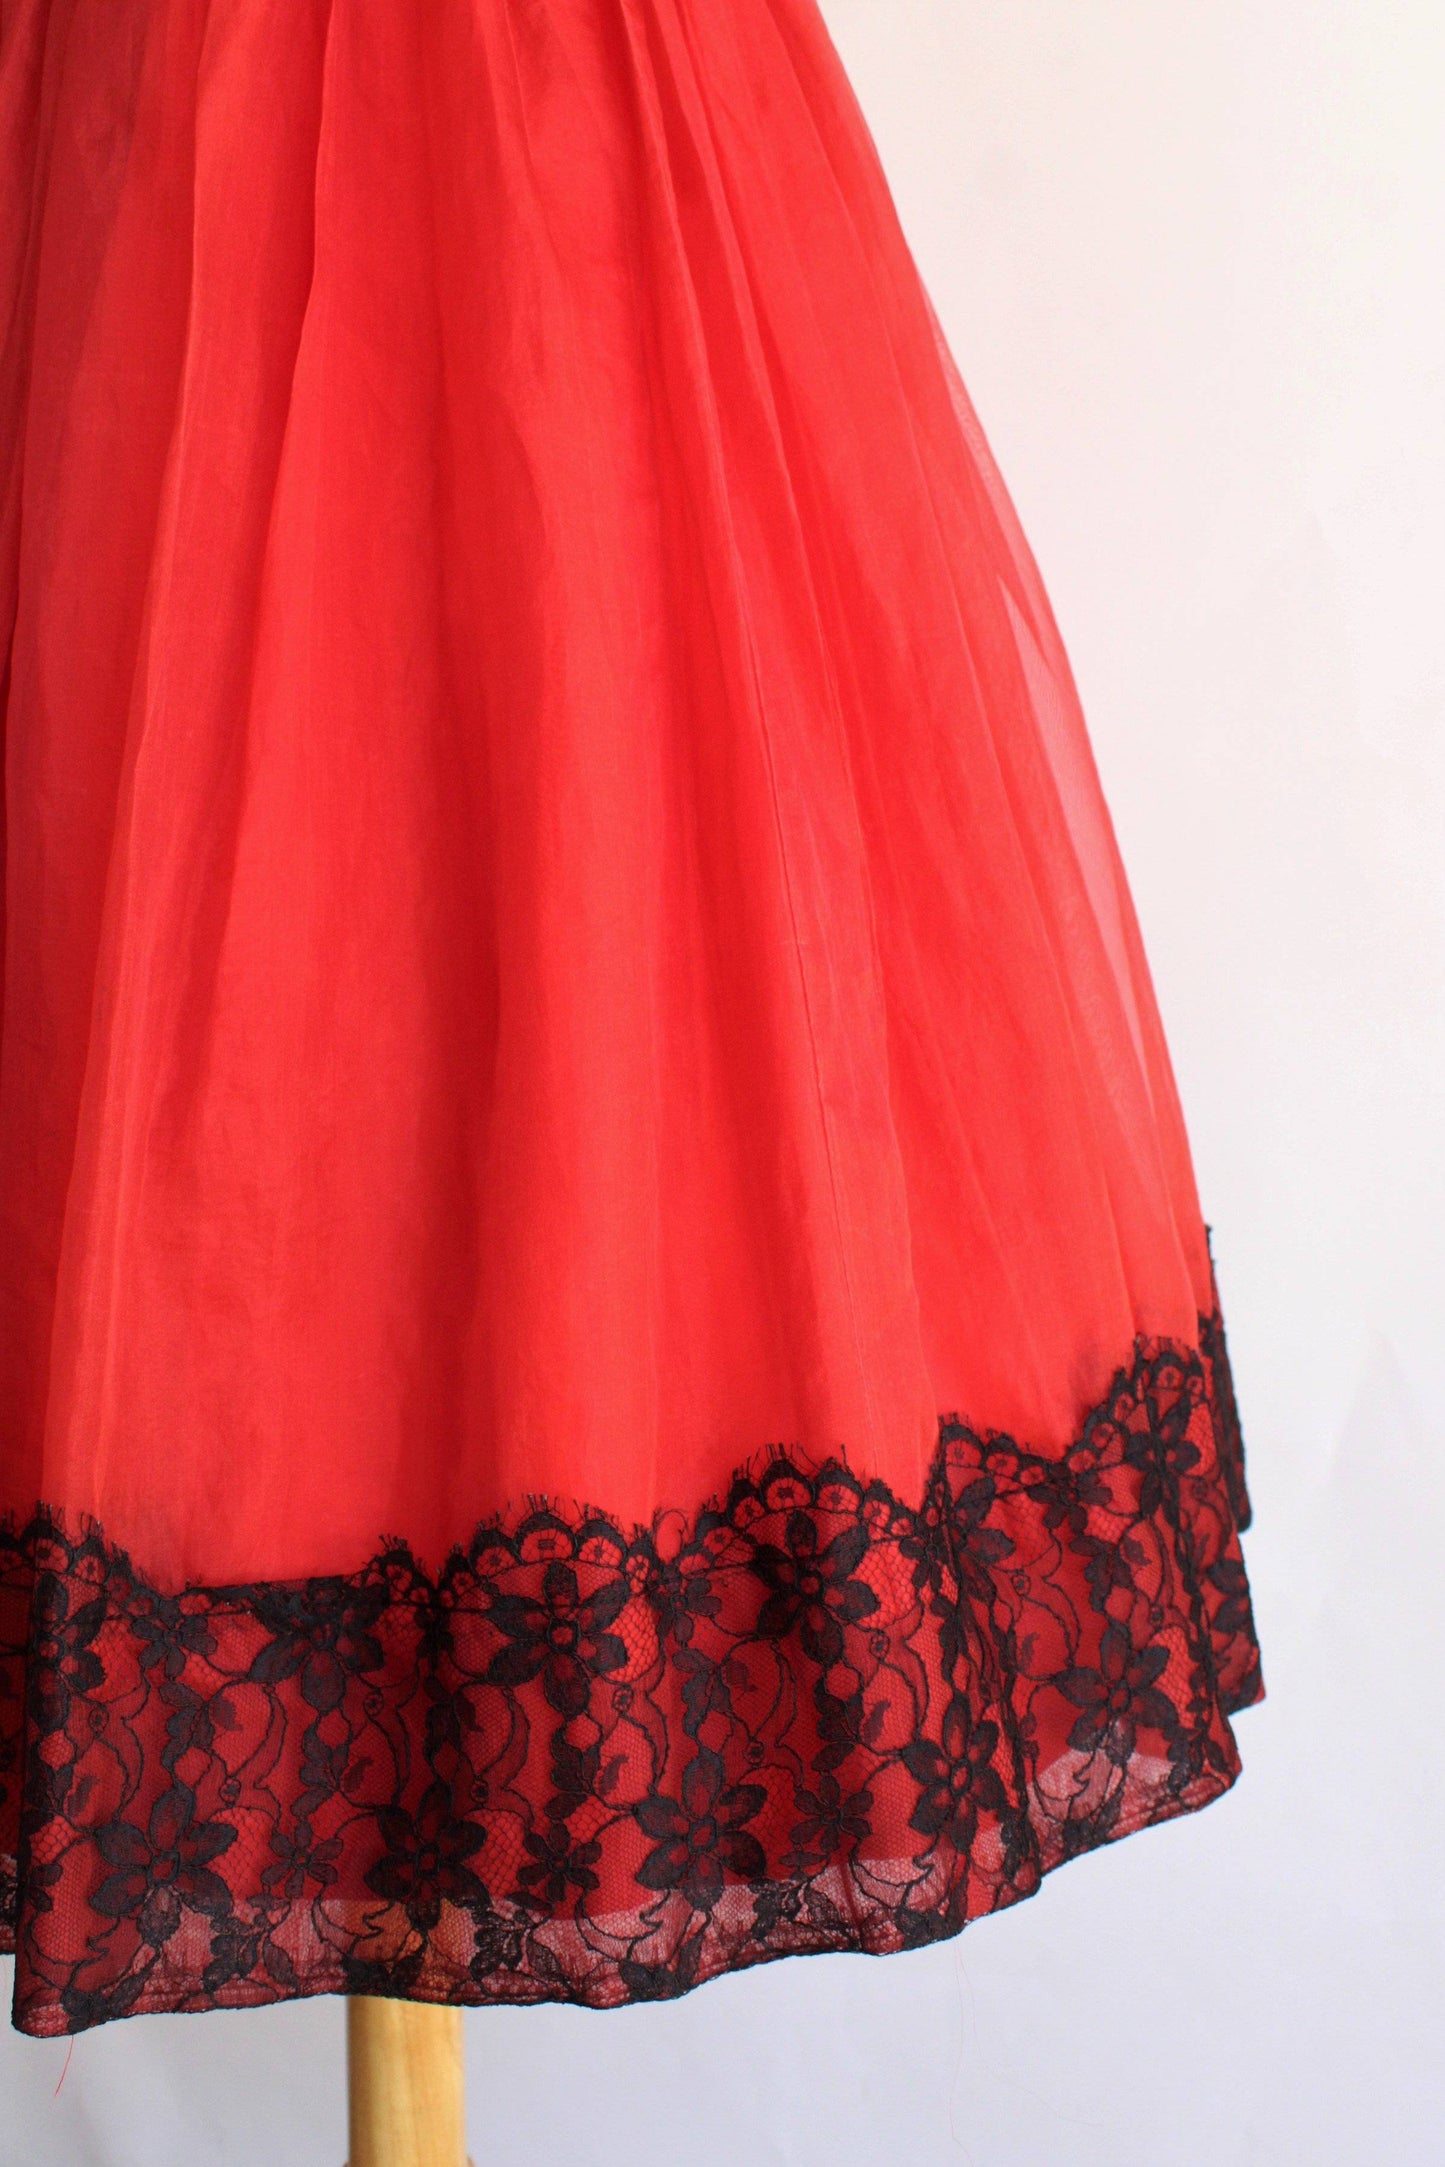 Vintage 1950s Full Skirt Party Dress Red with Black Lace Dress